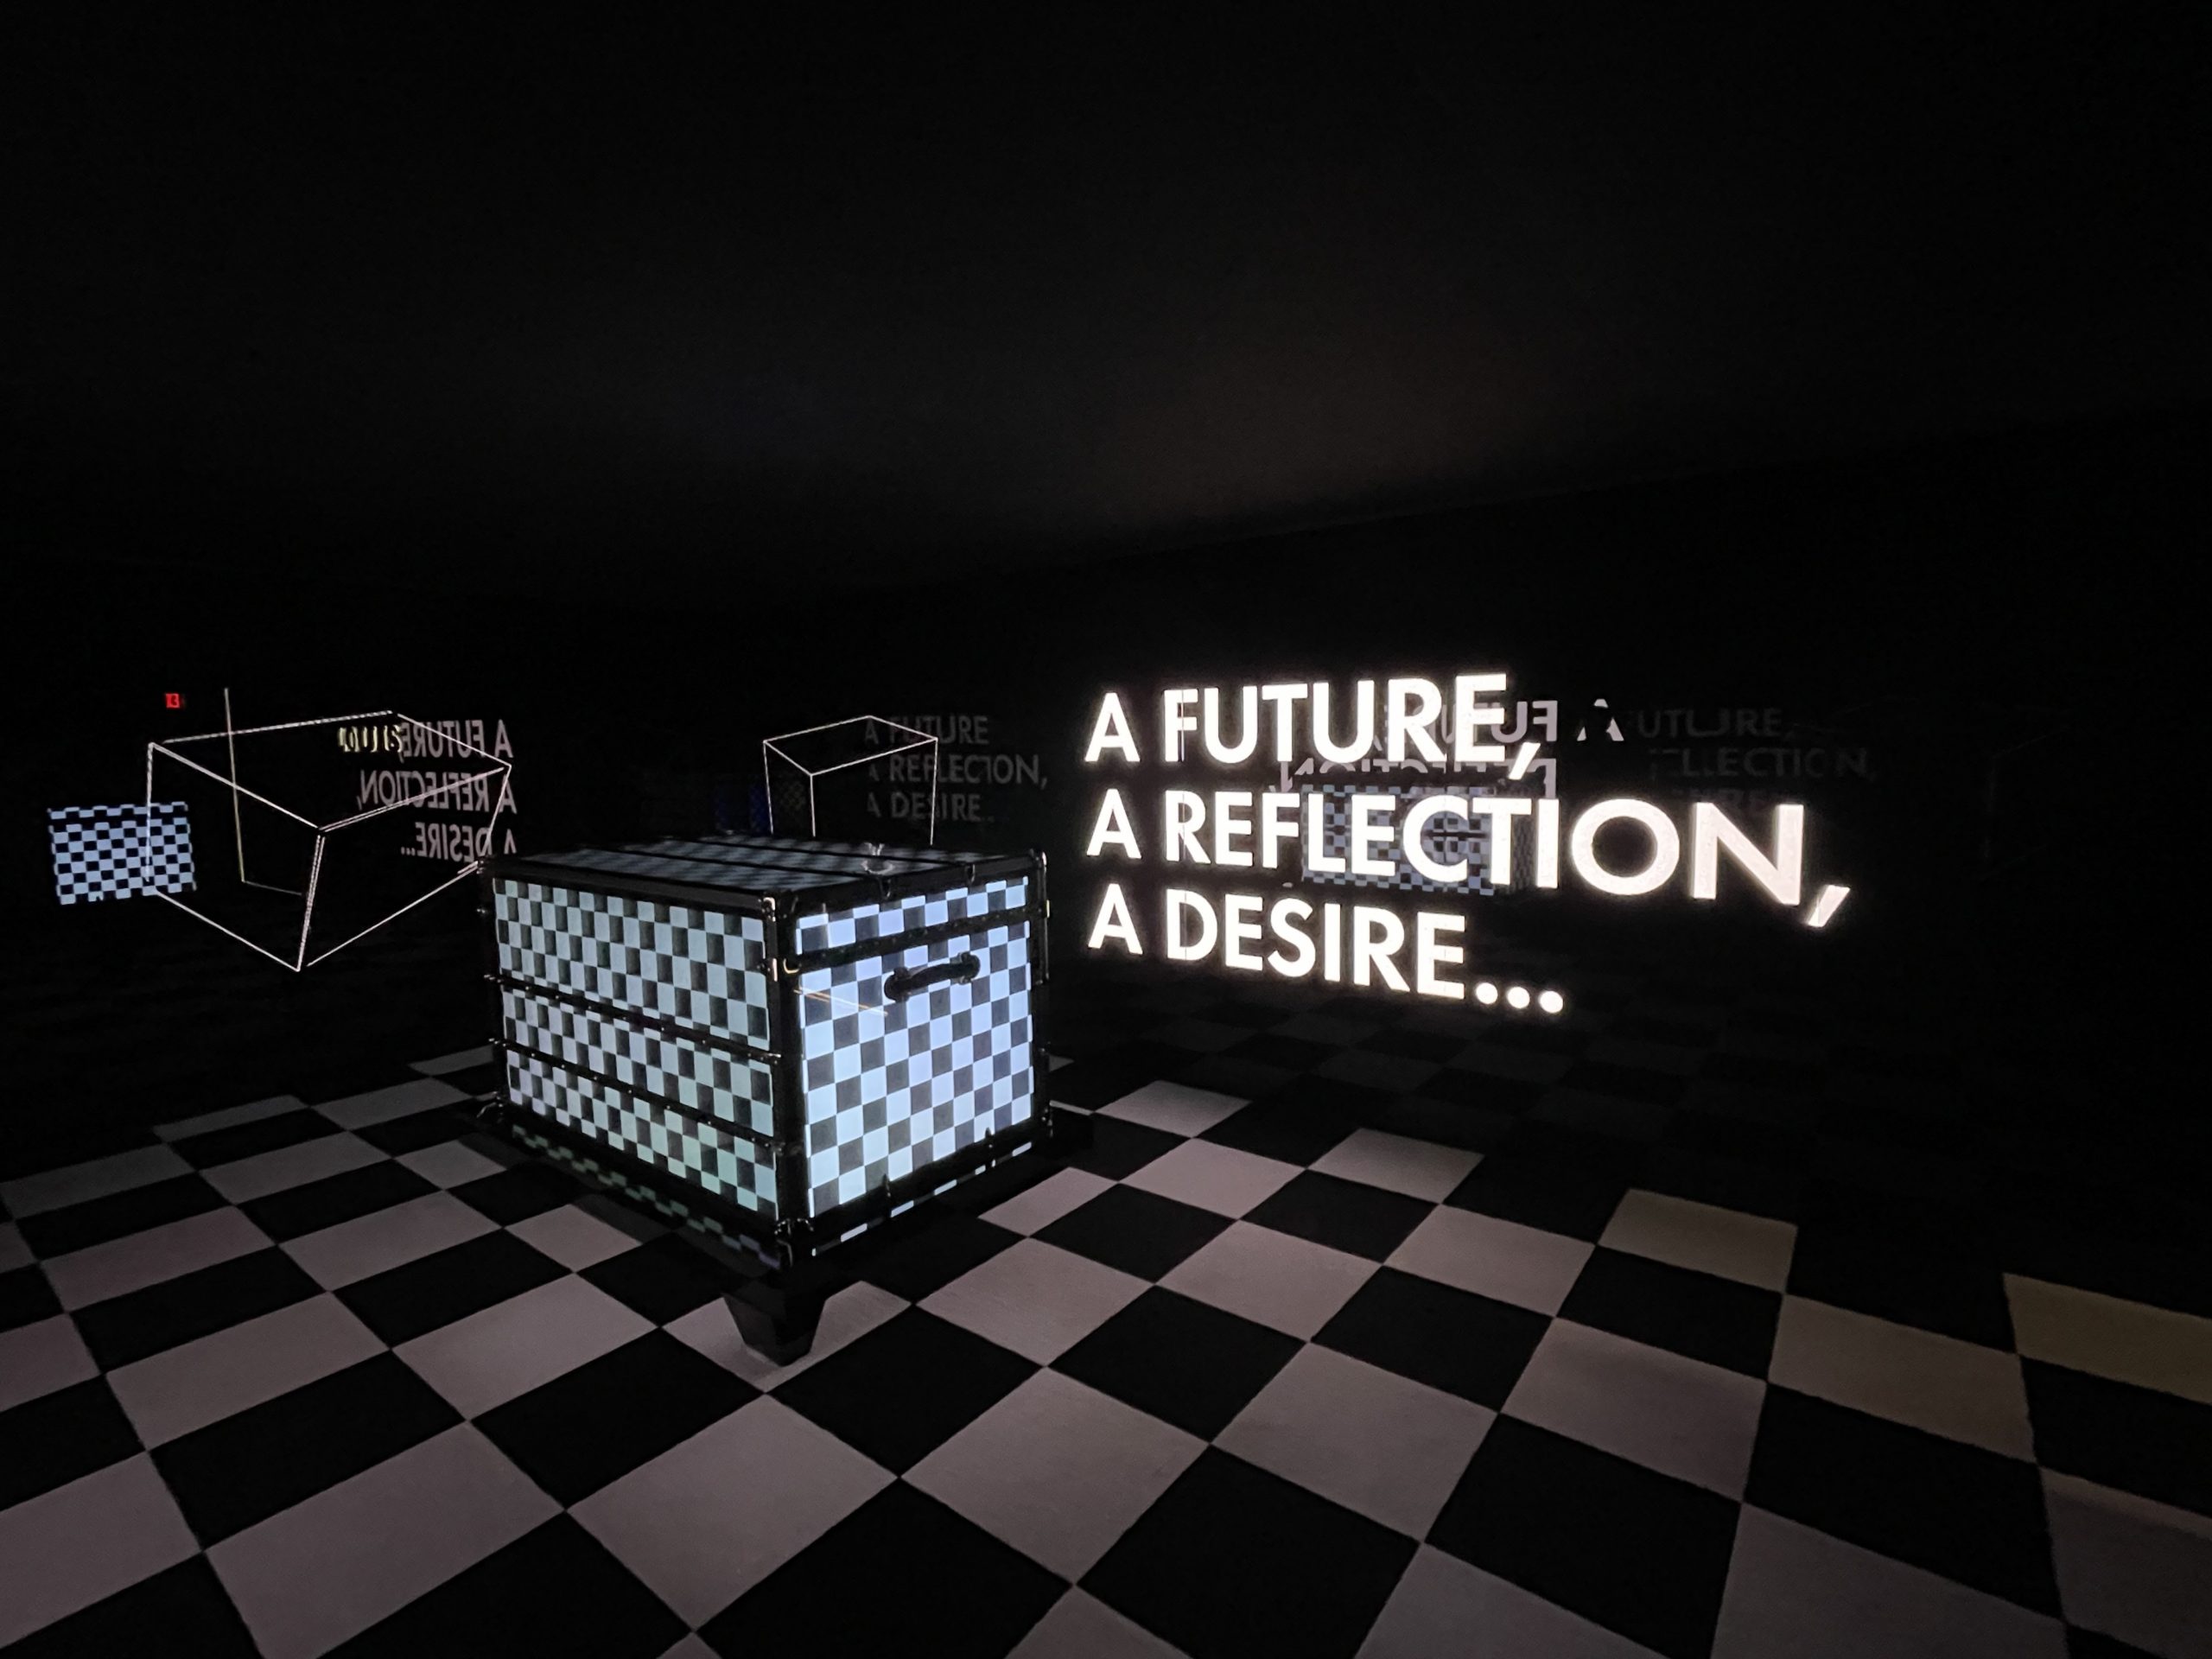 New York: The Last Port-of-Call for the “Louis Vuitton: 200 Trunks, 200 Visionaries” Exhibition